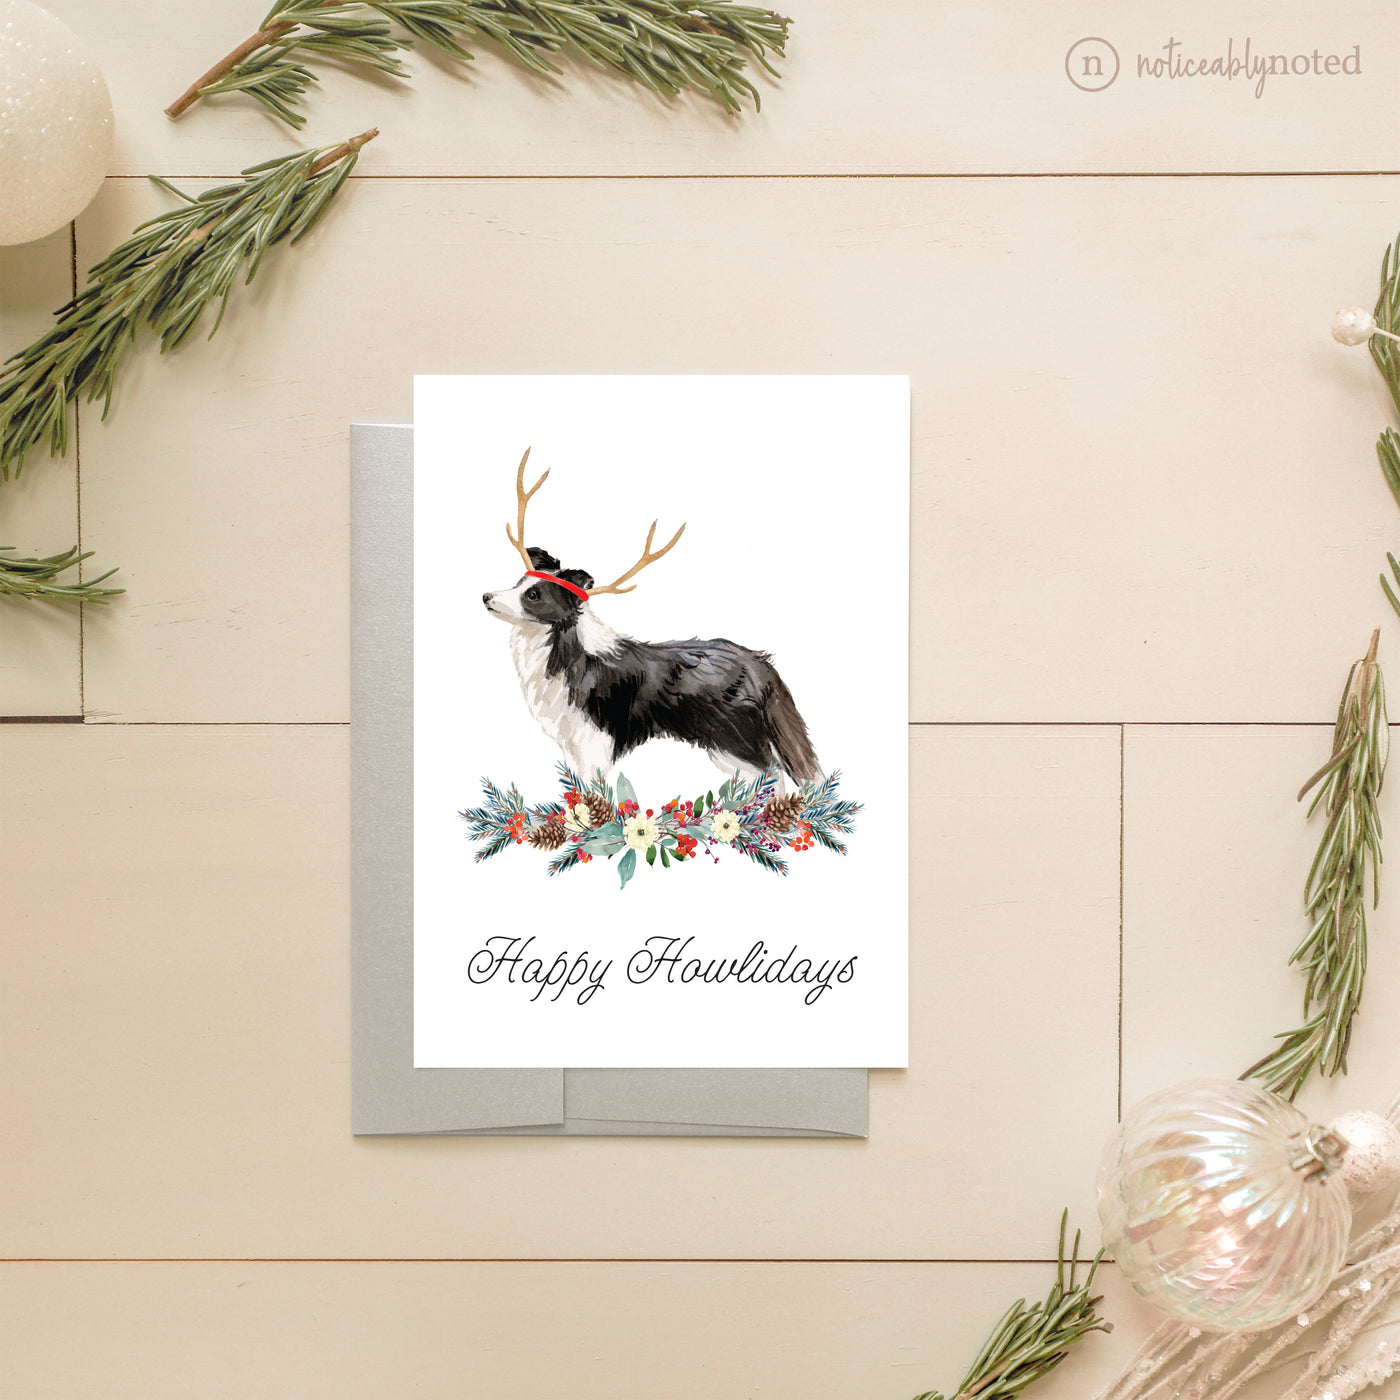 Collie Dog Holiday Card | Noticeably Noted